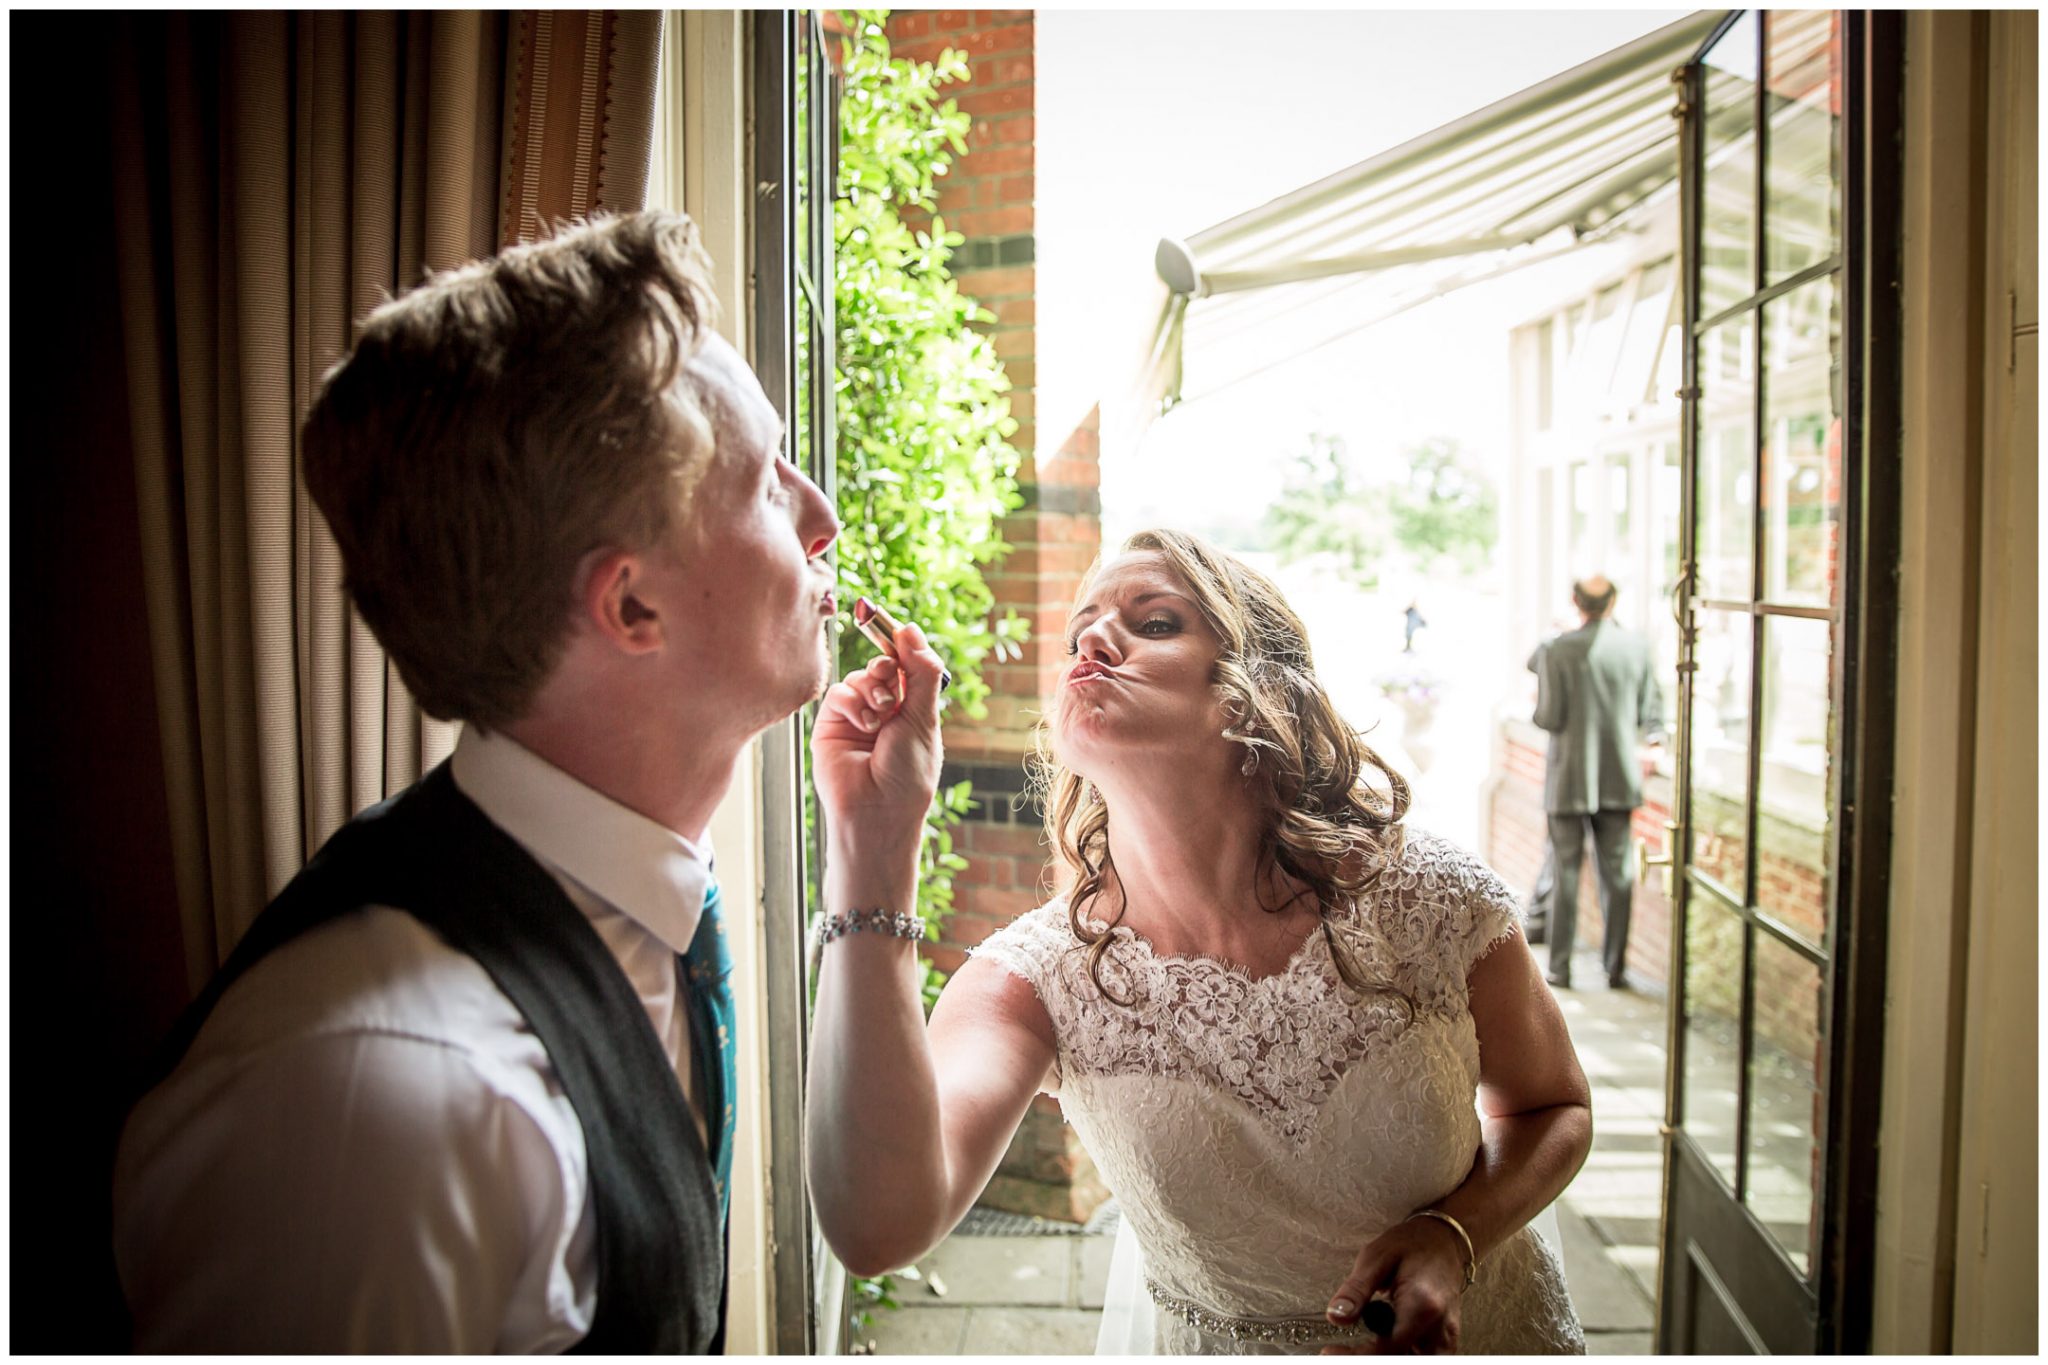 The bride applies a few finishing touches to the wedding coordinator's makeup